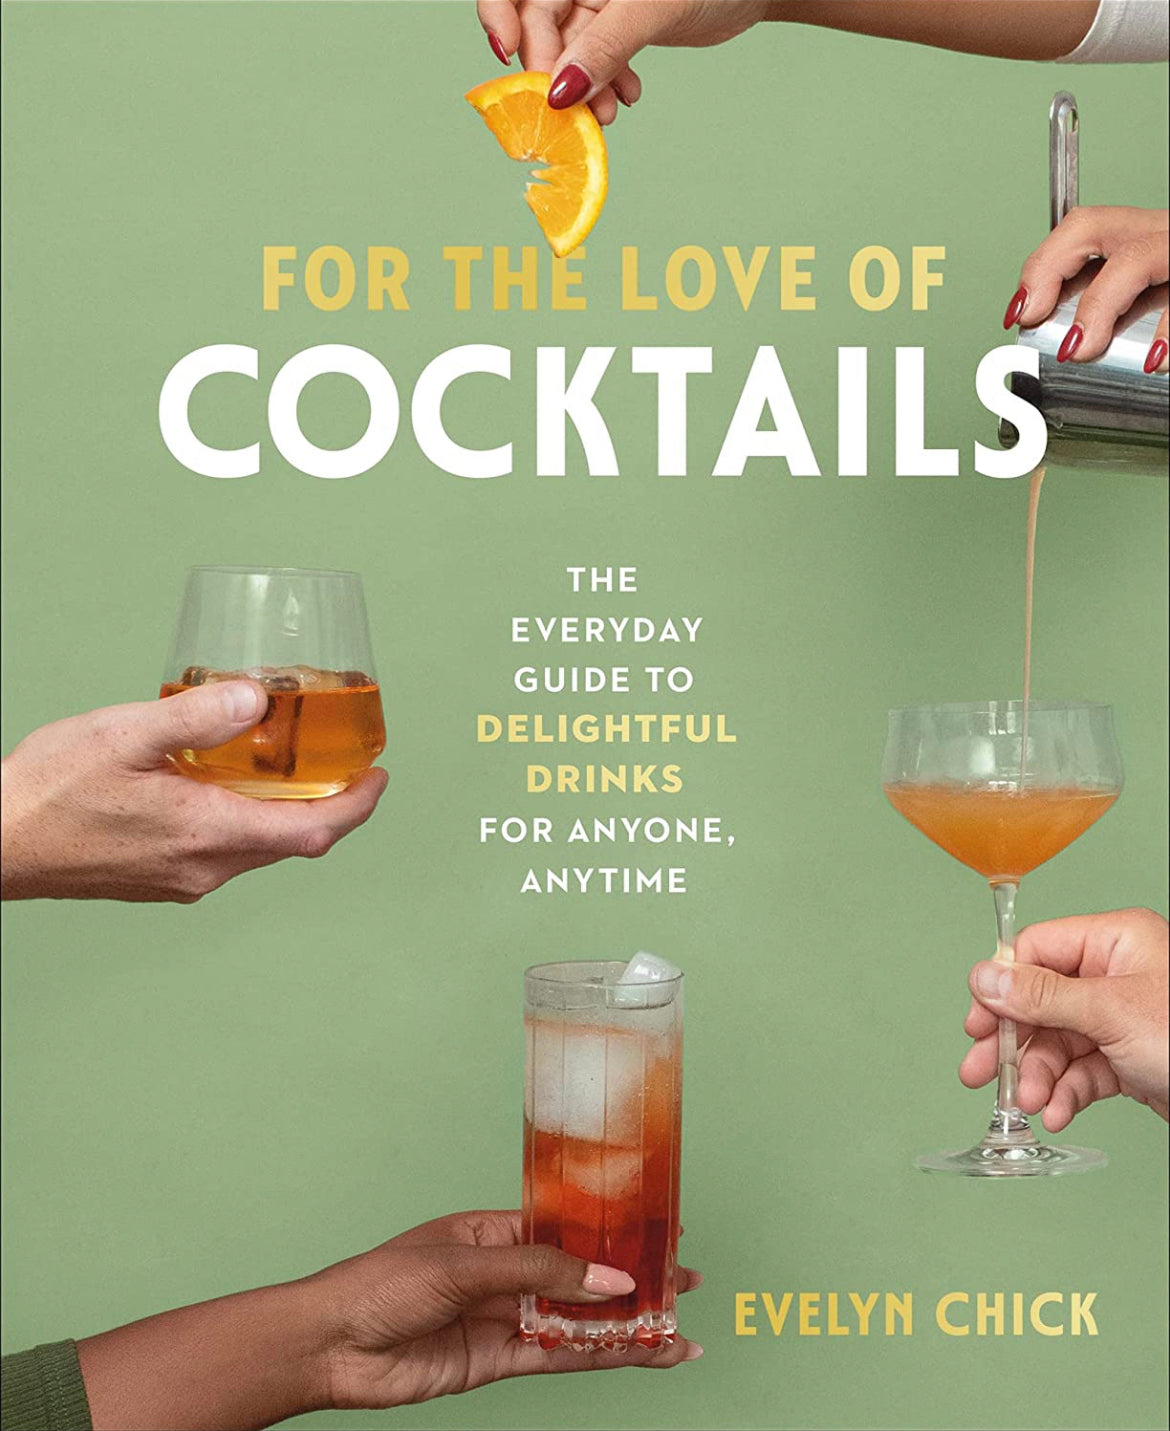 For The Love of Cocktails: The Everyday Guide to Delightful Drinks for Anyone, Anytime (PREORDERS)